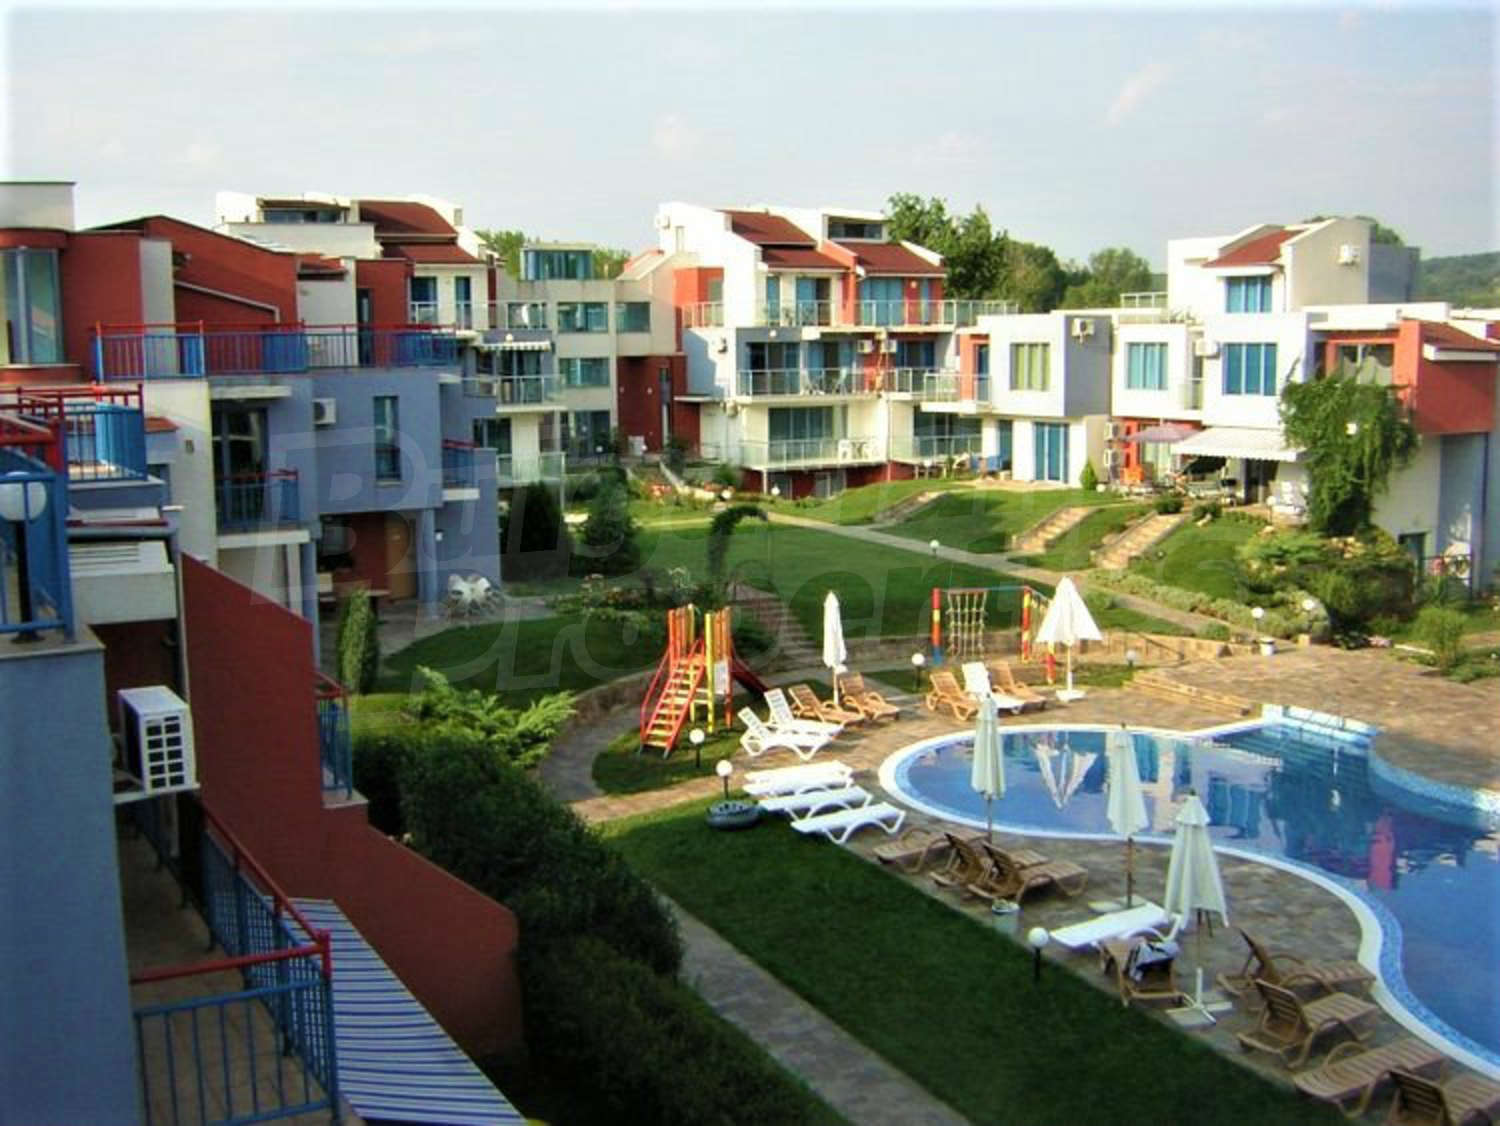 1-bedroom apartment in gated complex Apolonia Beach - Kavatsi